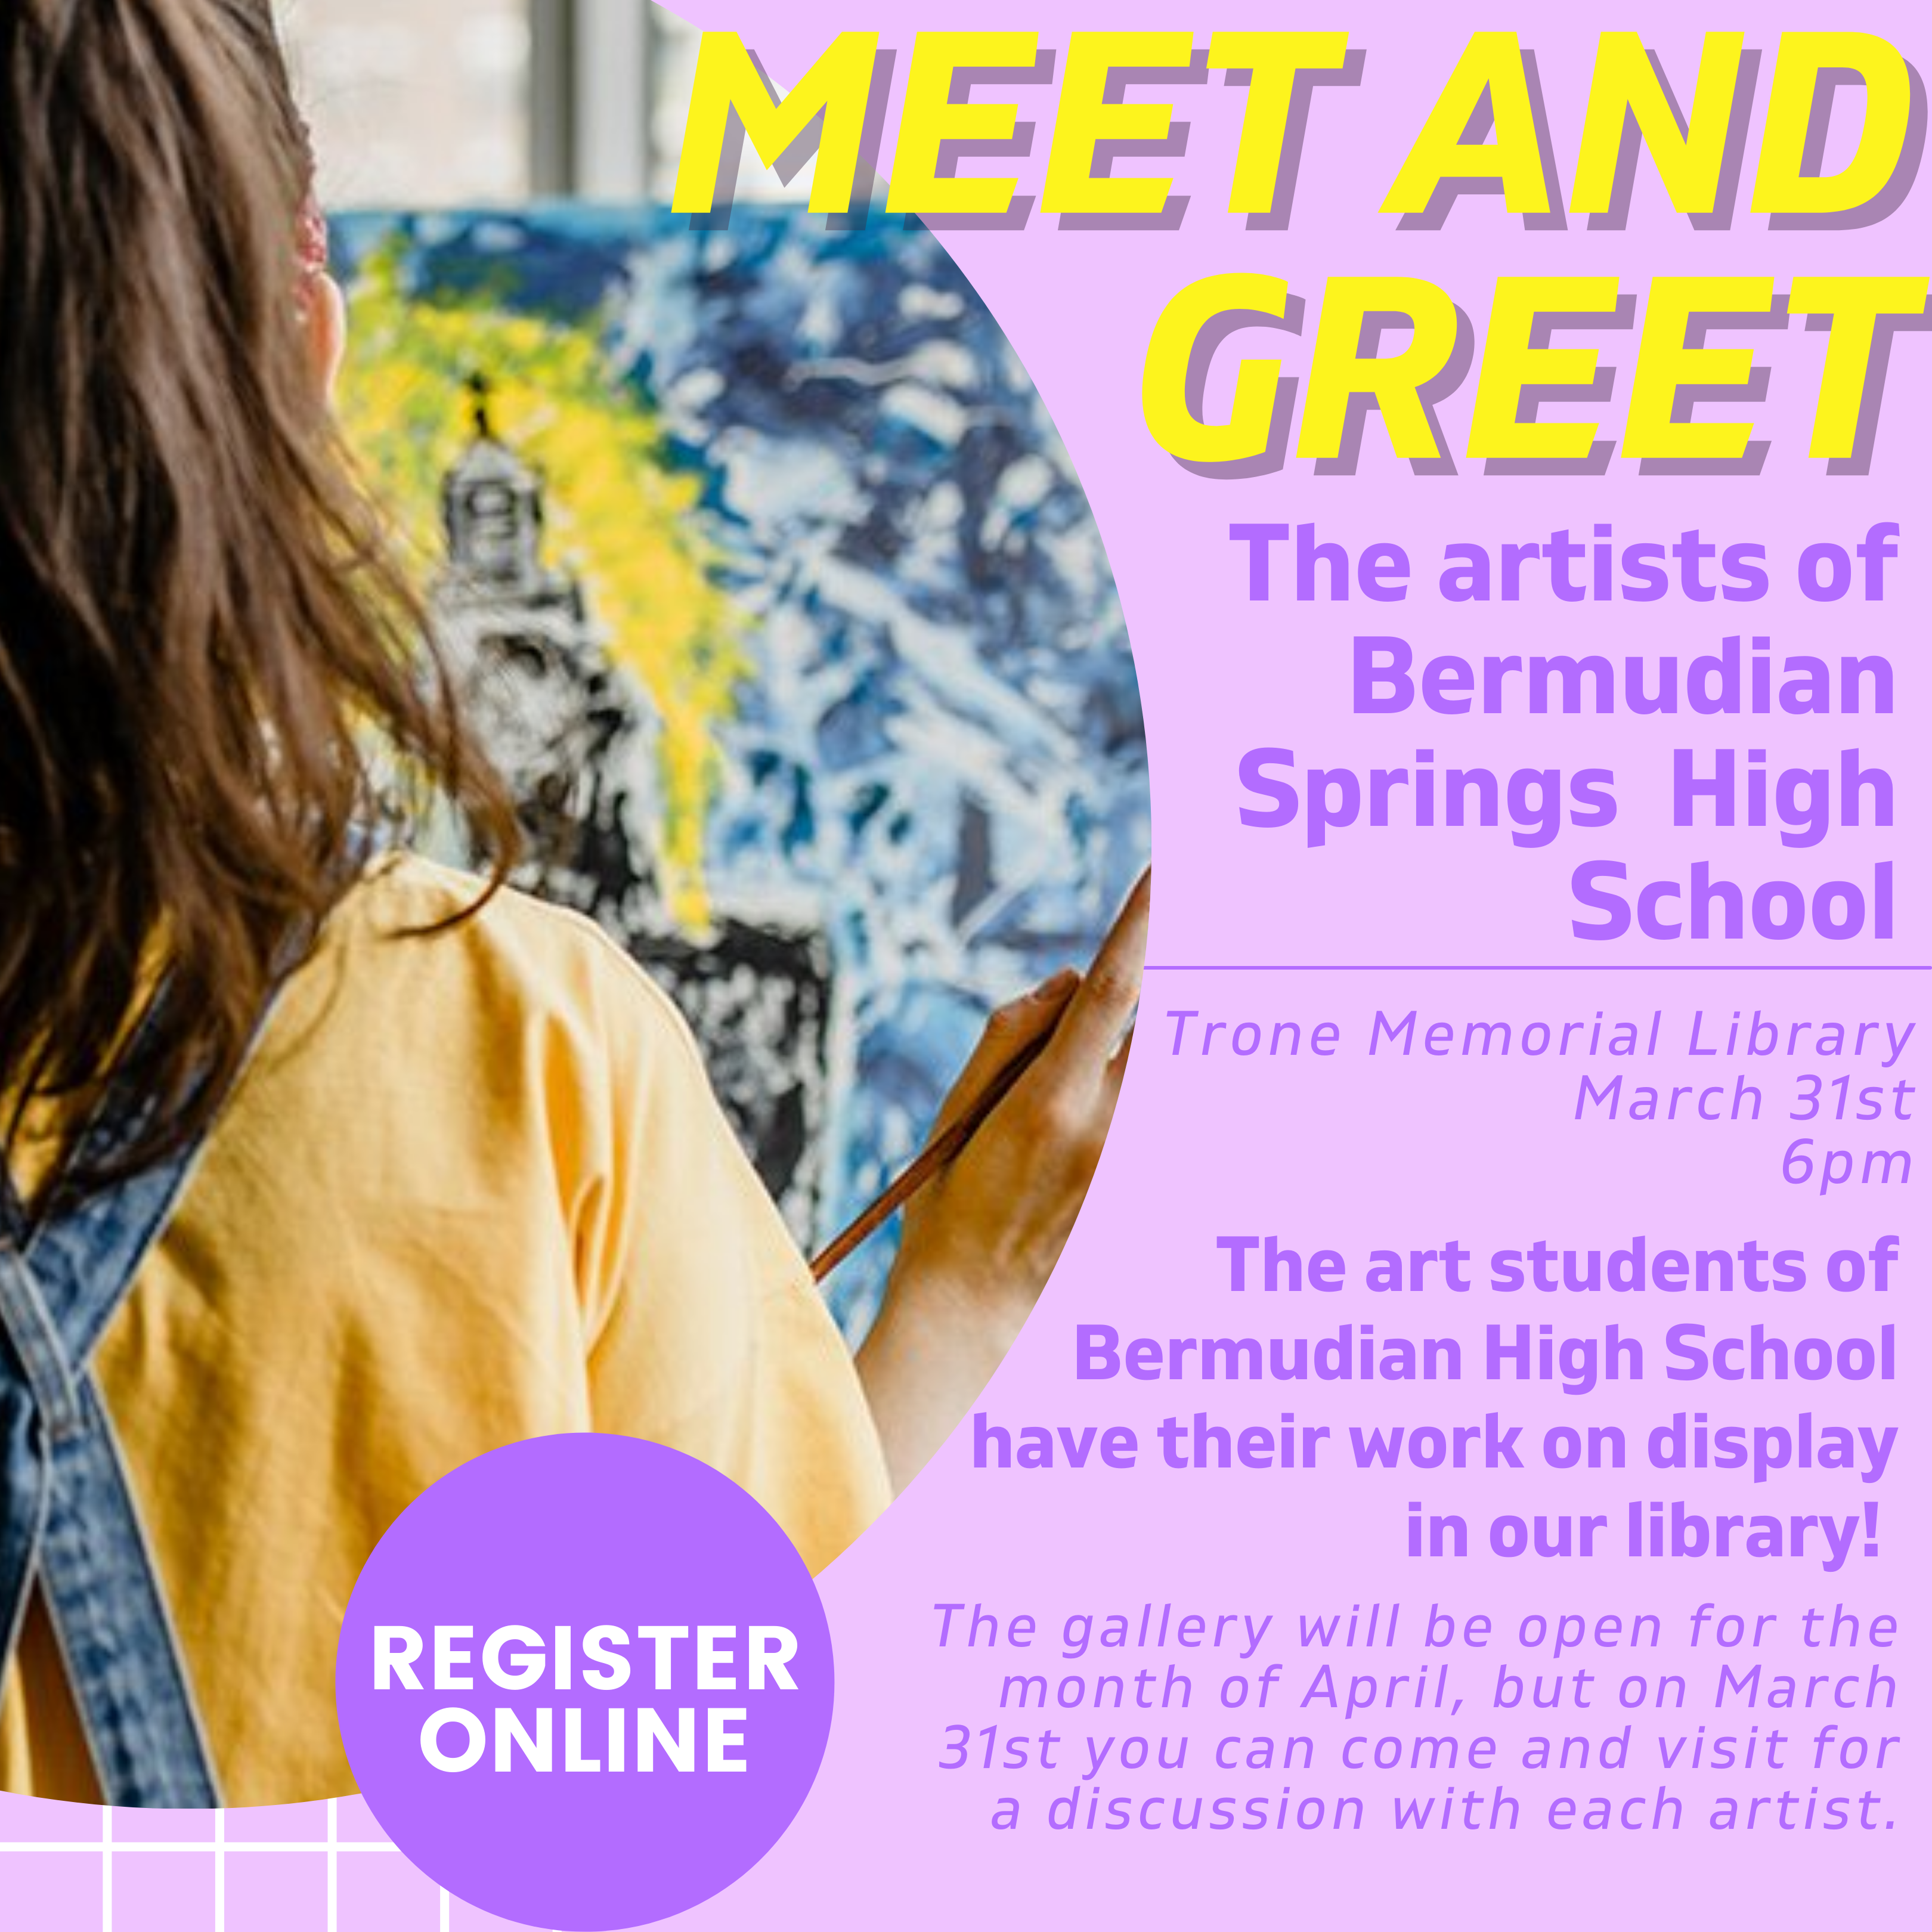 A picture of a young woman painting a canvas. The text reads, "MEET AND GREET the artists of Bermudian Springs High School. Trone Memorial Library March 31st at 6pm. The art students of Bermudian High School have their work on display in our library! The gallery will be open for the month of April, but on March 31st you can come and visit for a discussion with each artist. Register Online."